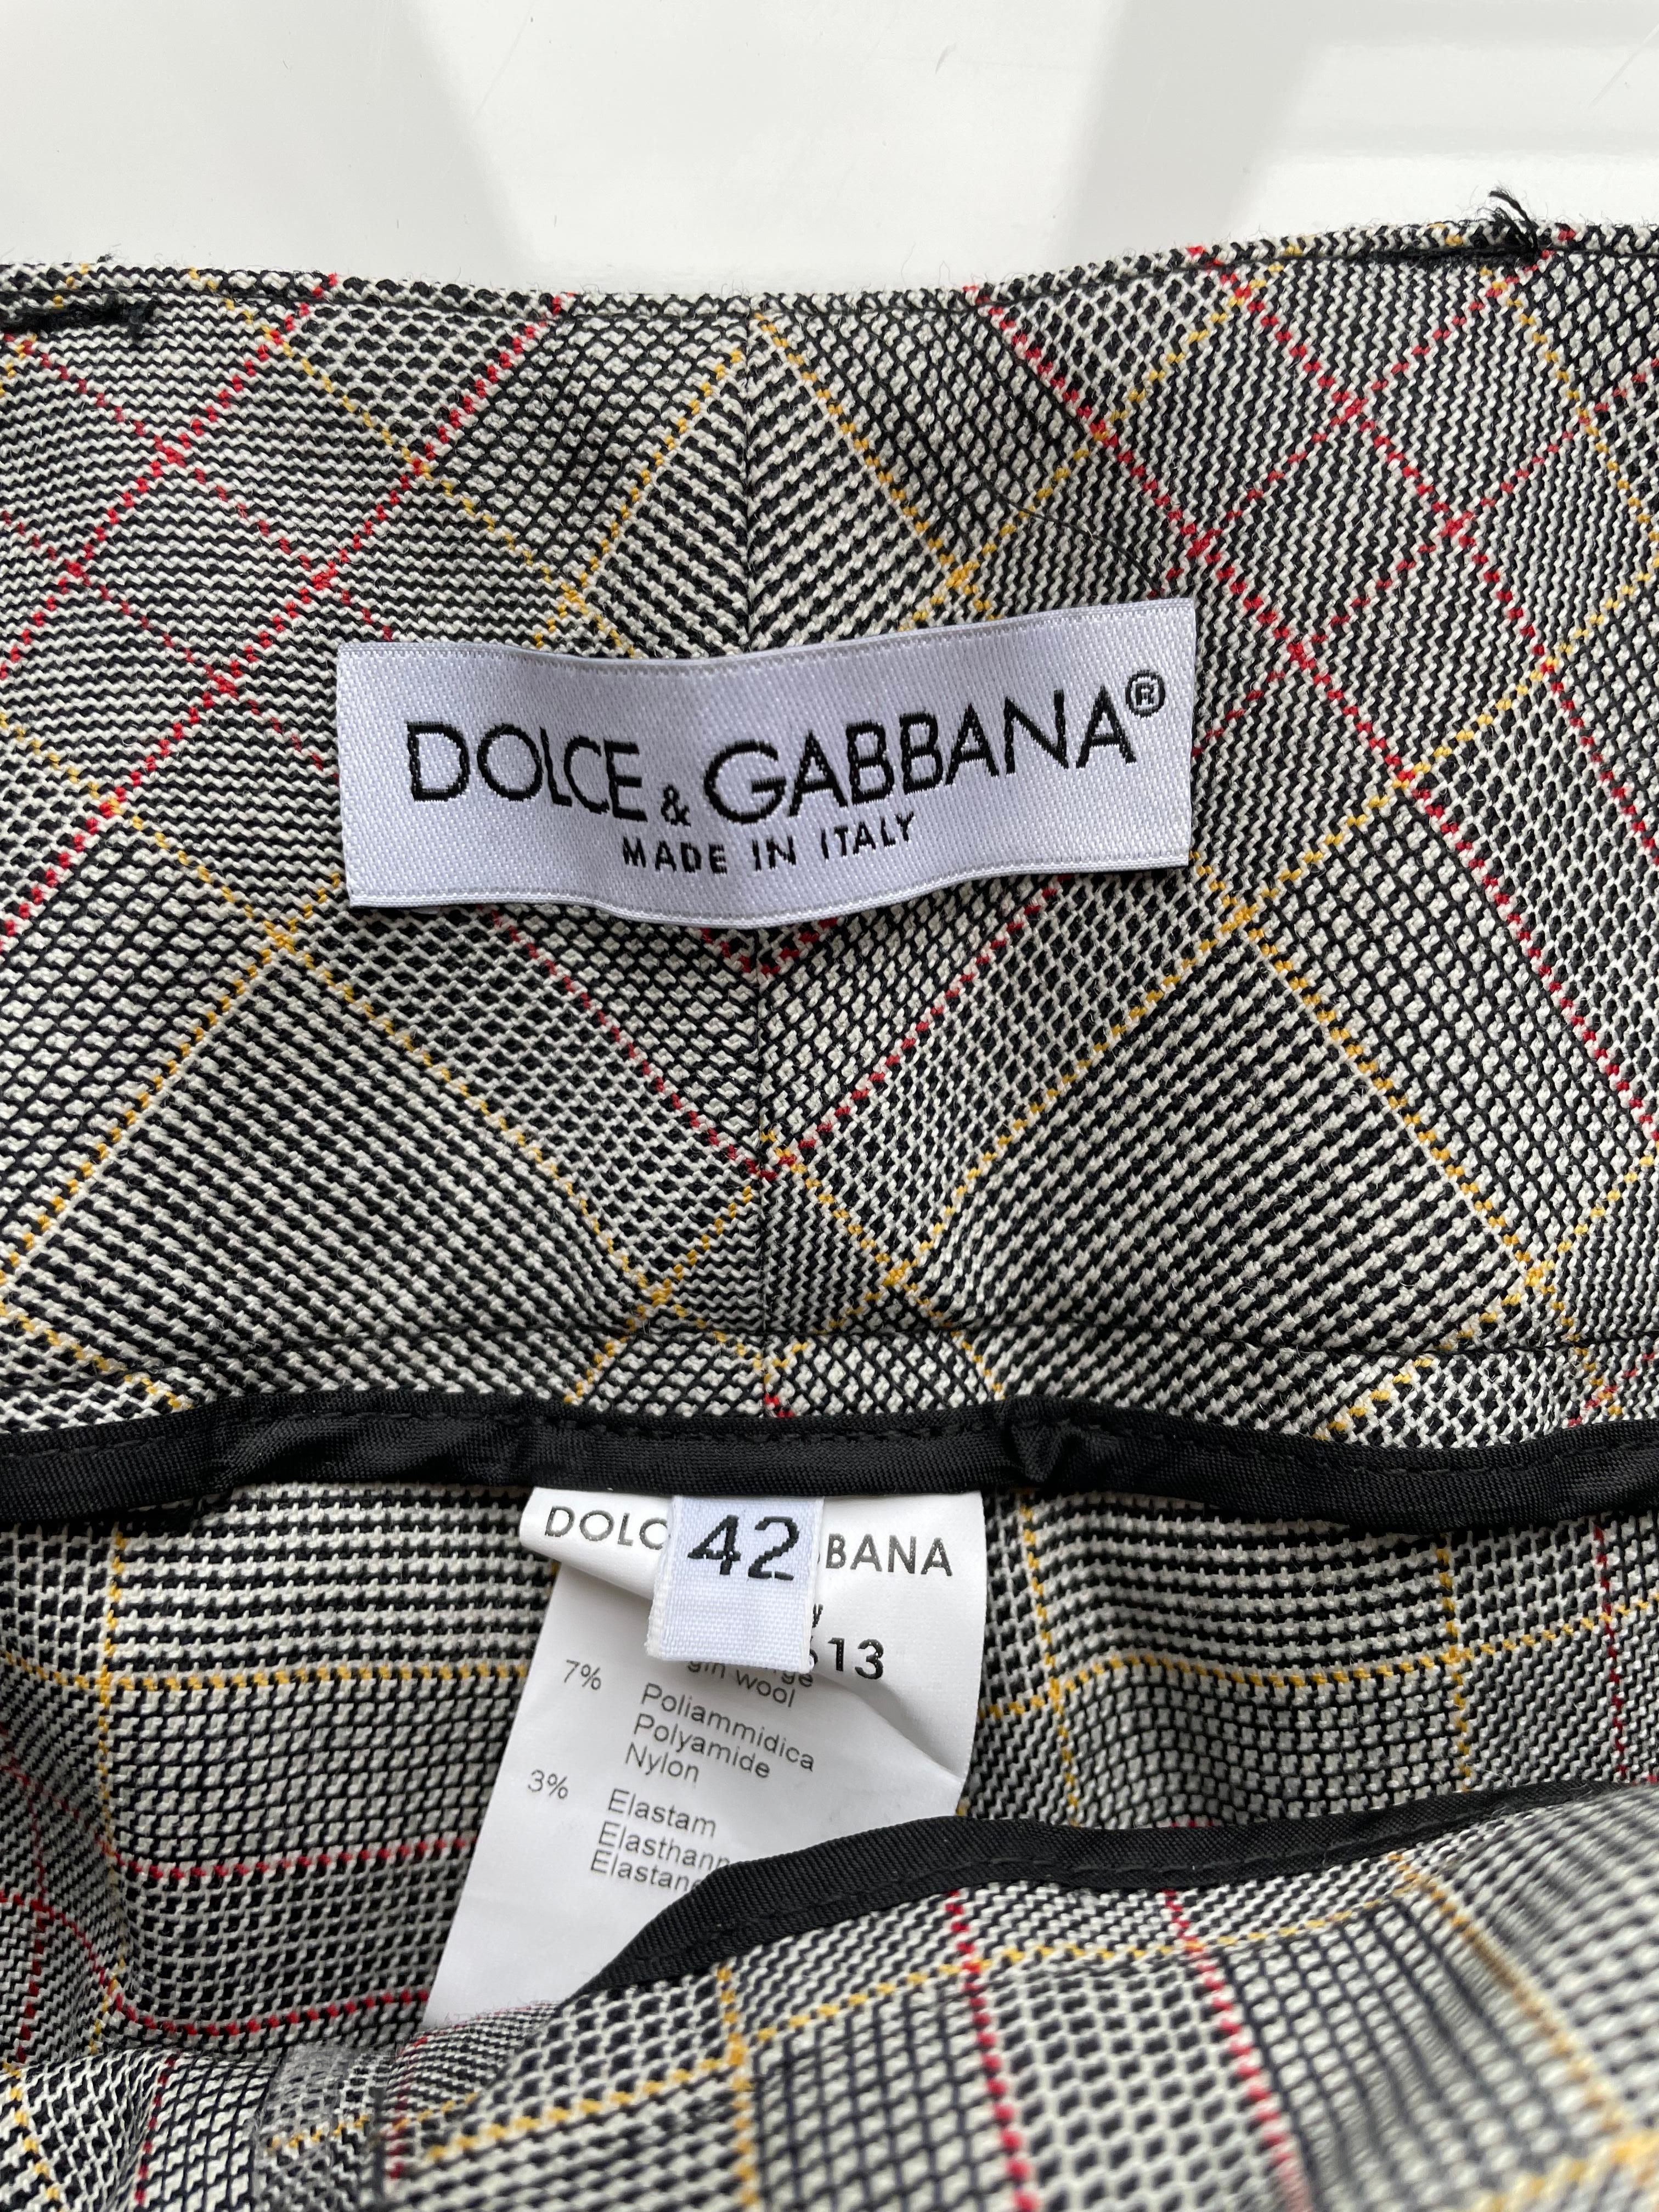 Dolce and Gabbana Wool Plaid Peak Lapel Blazer with Matching Pants Suit For Sale 9